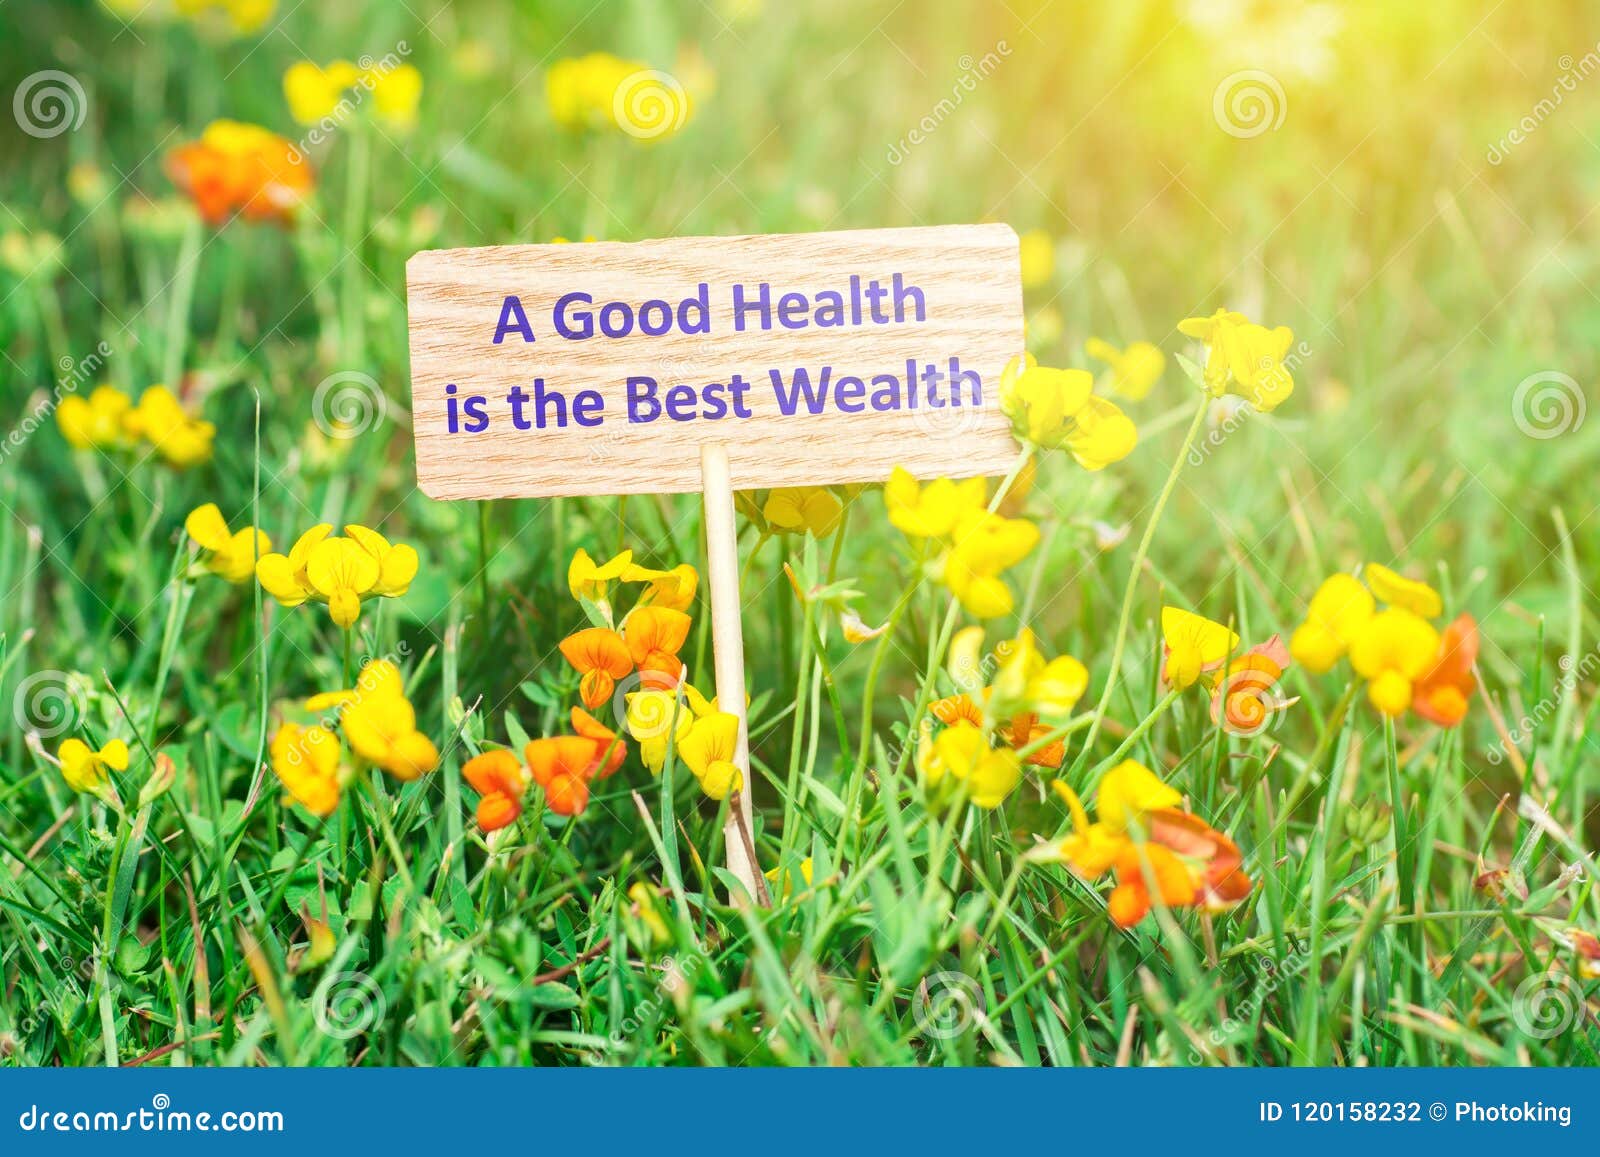 a good health is the best wealth signboard